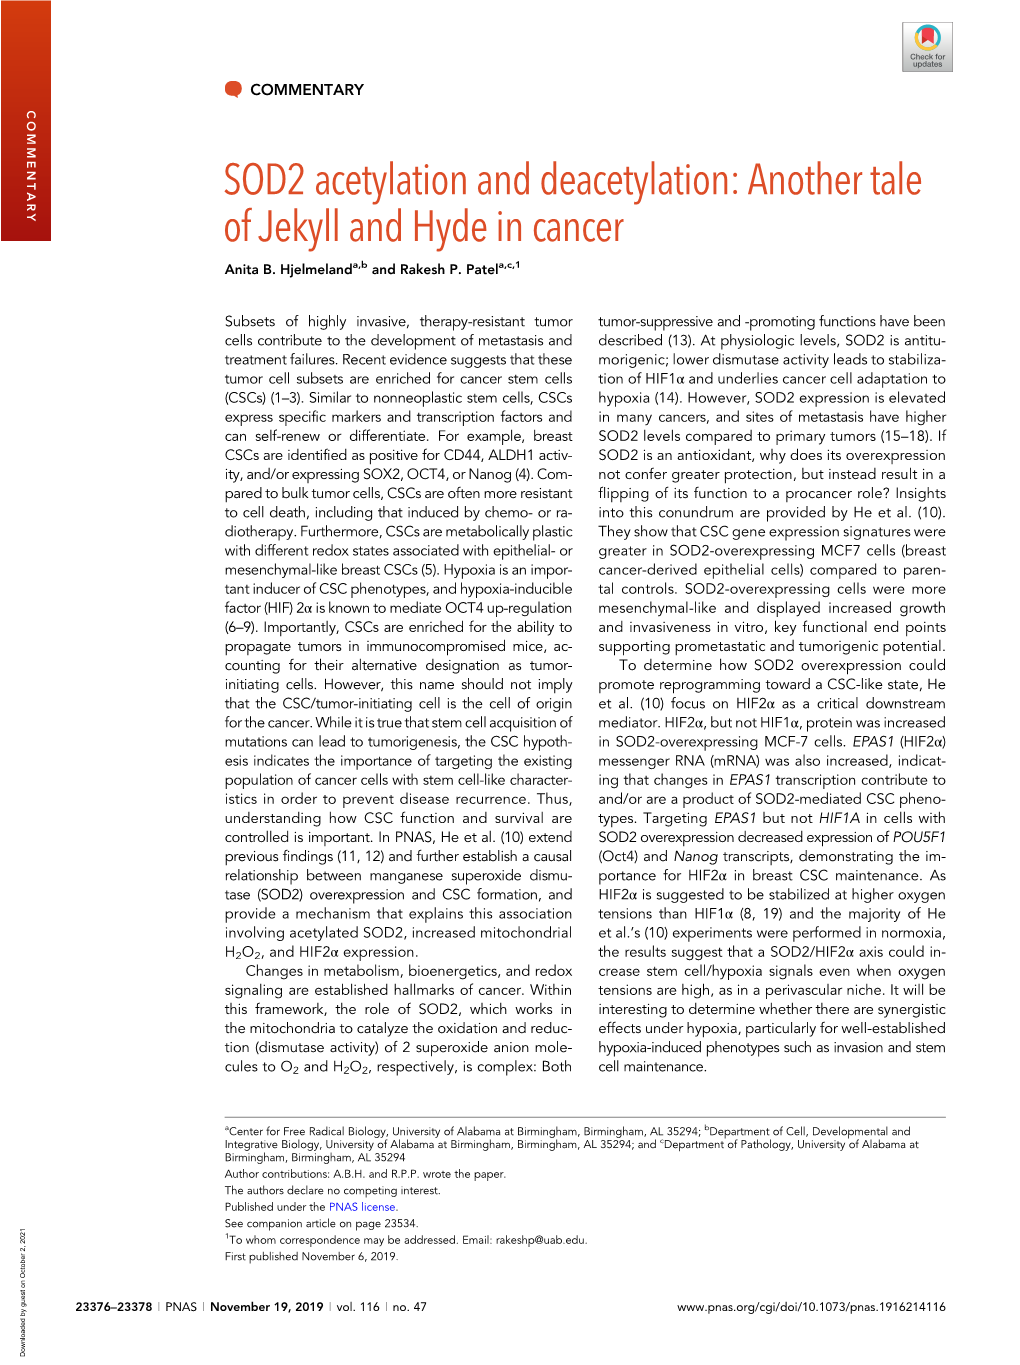 SOD2 Acetylation and Deacetylation: Another Tale of Jekyll and Hyde in Cancer